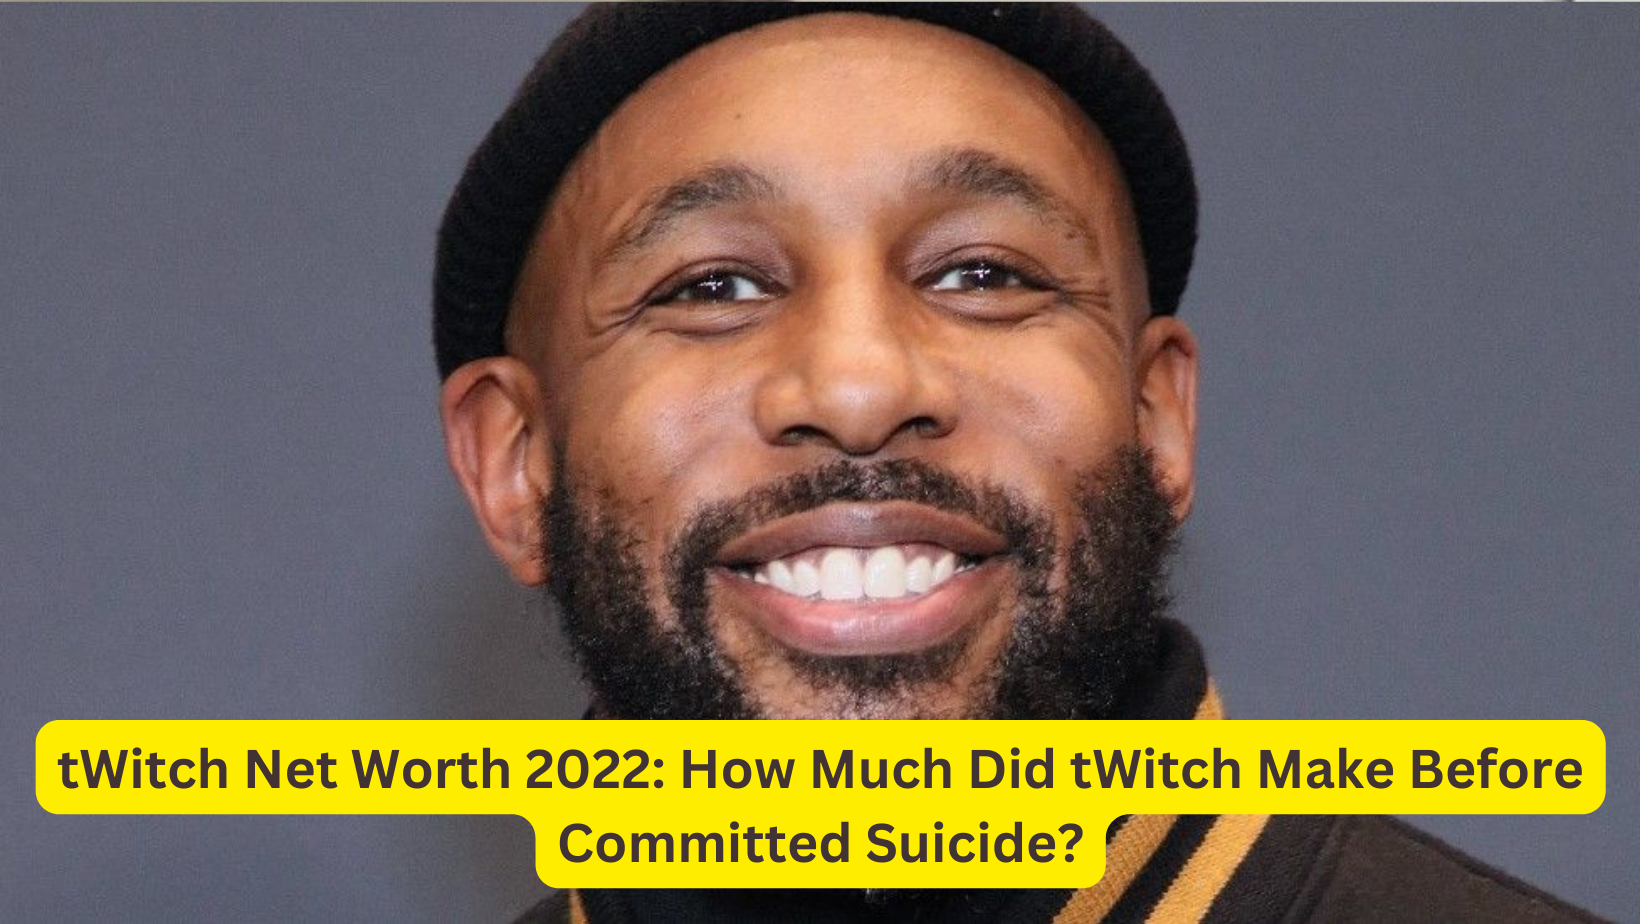 tWitch Net Worth 2022: How Much Did tWitch Make Before Committed Suicide?